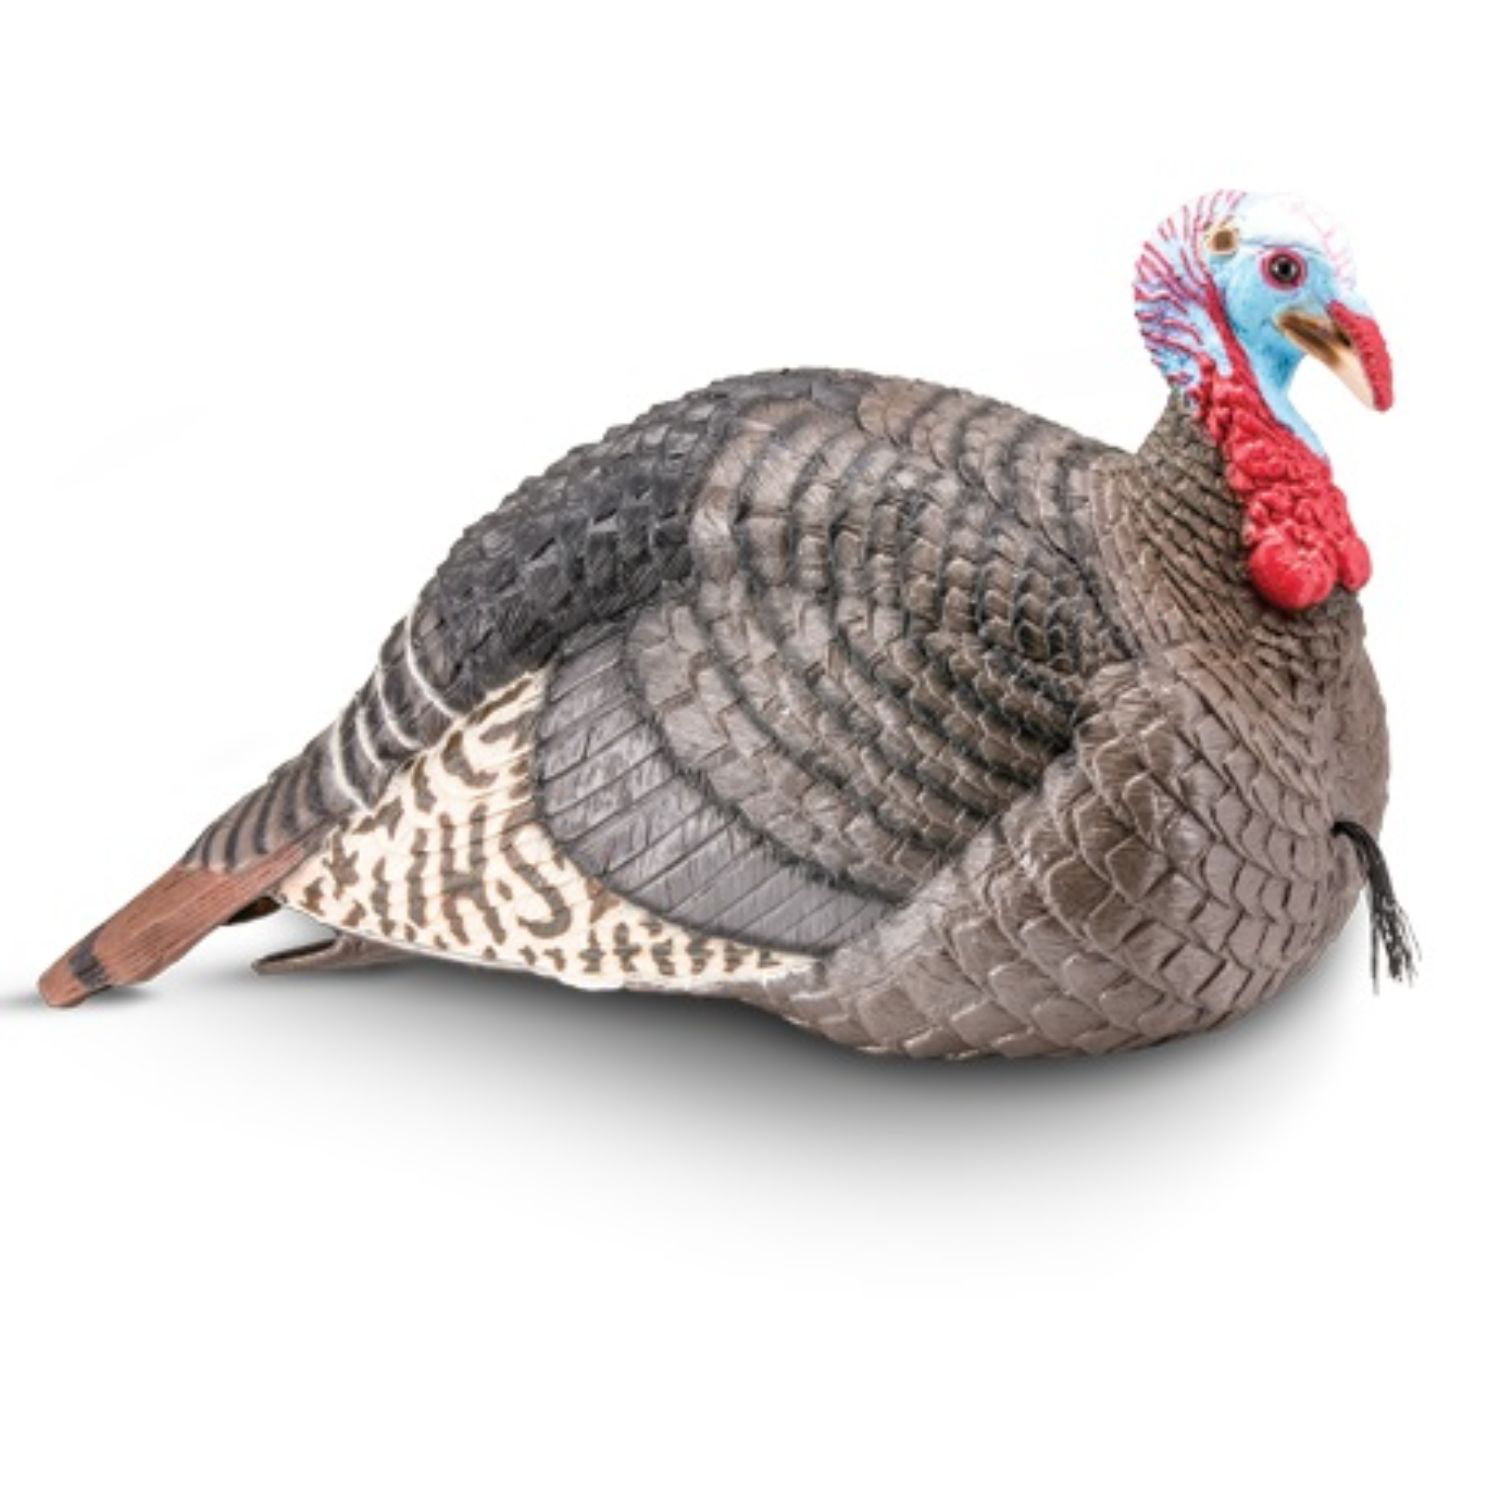 Cherokee Sports Featherlite Standing Jake Inflatable Turkey Decoy New In Box Details about    3 